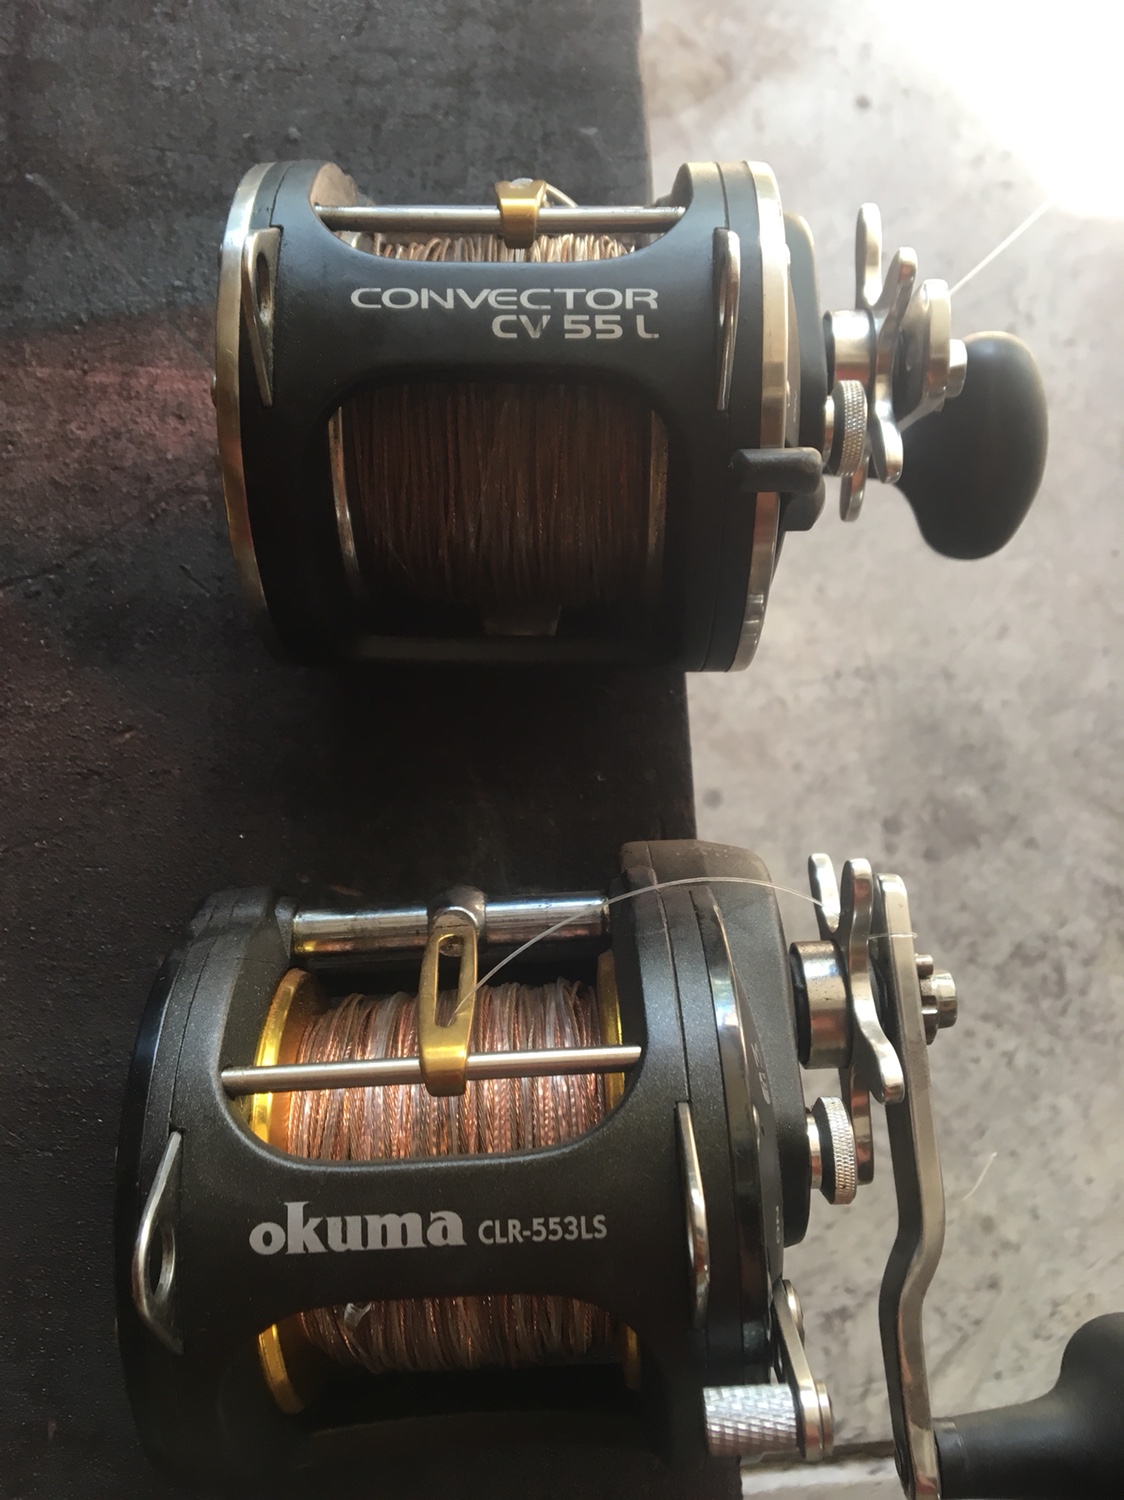 Okuma CLR 553 LS and Okuma Convector CV55L copper reels - Classifieds -  Buy, Sell, Trade or Rent - Lake Ontario United - Lake Ontario's Largest  Fishing & Hunting Community - New York and Ontario Canada